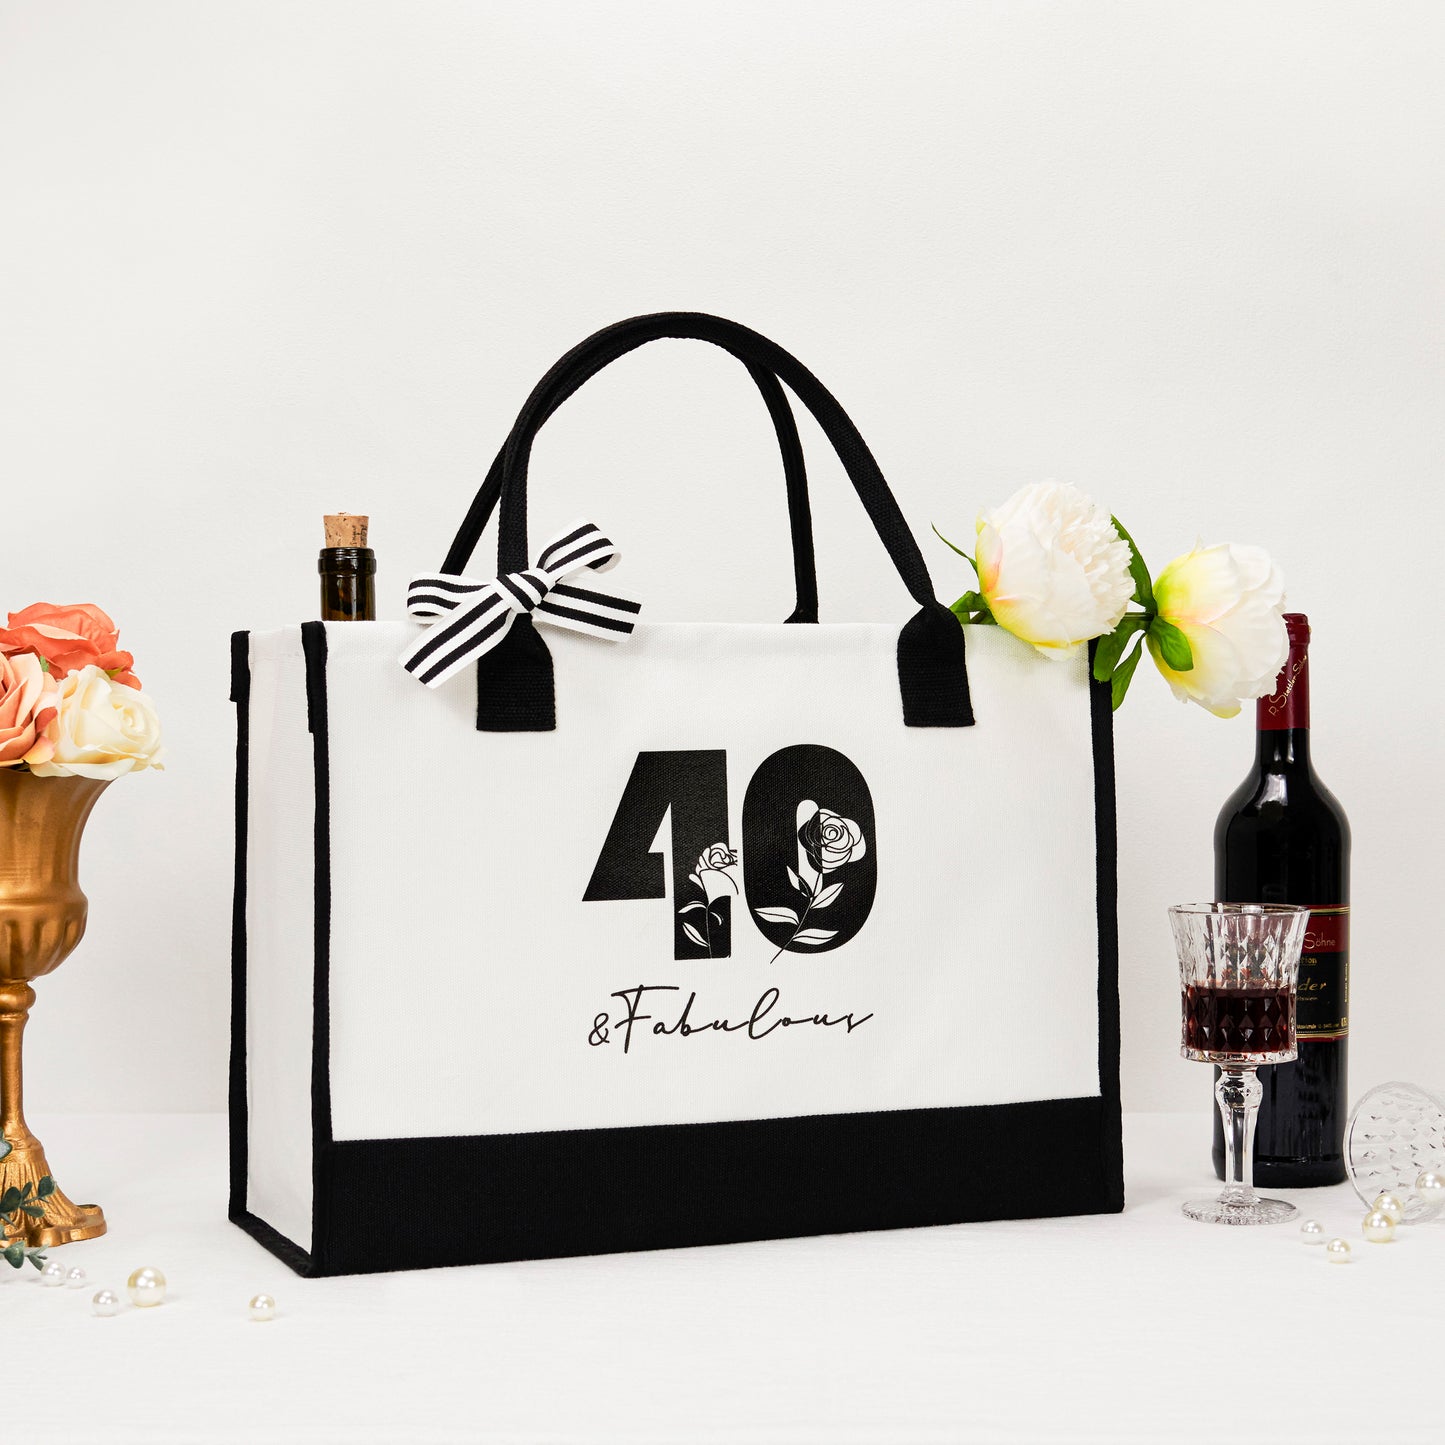 Crisky 40th Birthday Gifts for Women Canvas Tote Bag 40 & Fabulous Beach Bag for Wife/Sister/Mom/Aunt/Friends 40th Birthday Gifts,17" x 12" x 7"